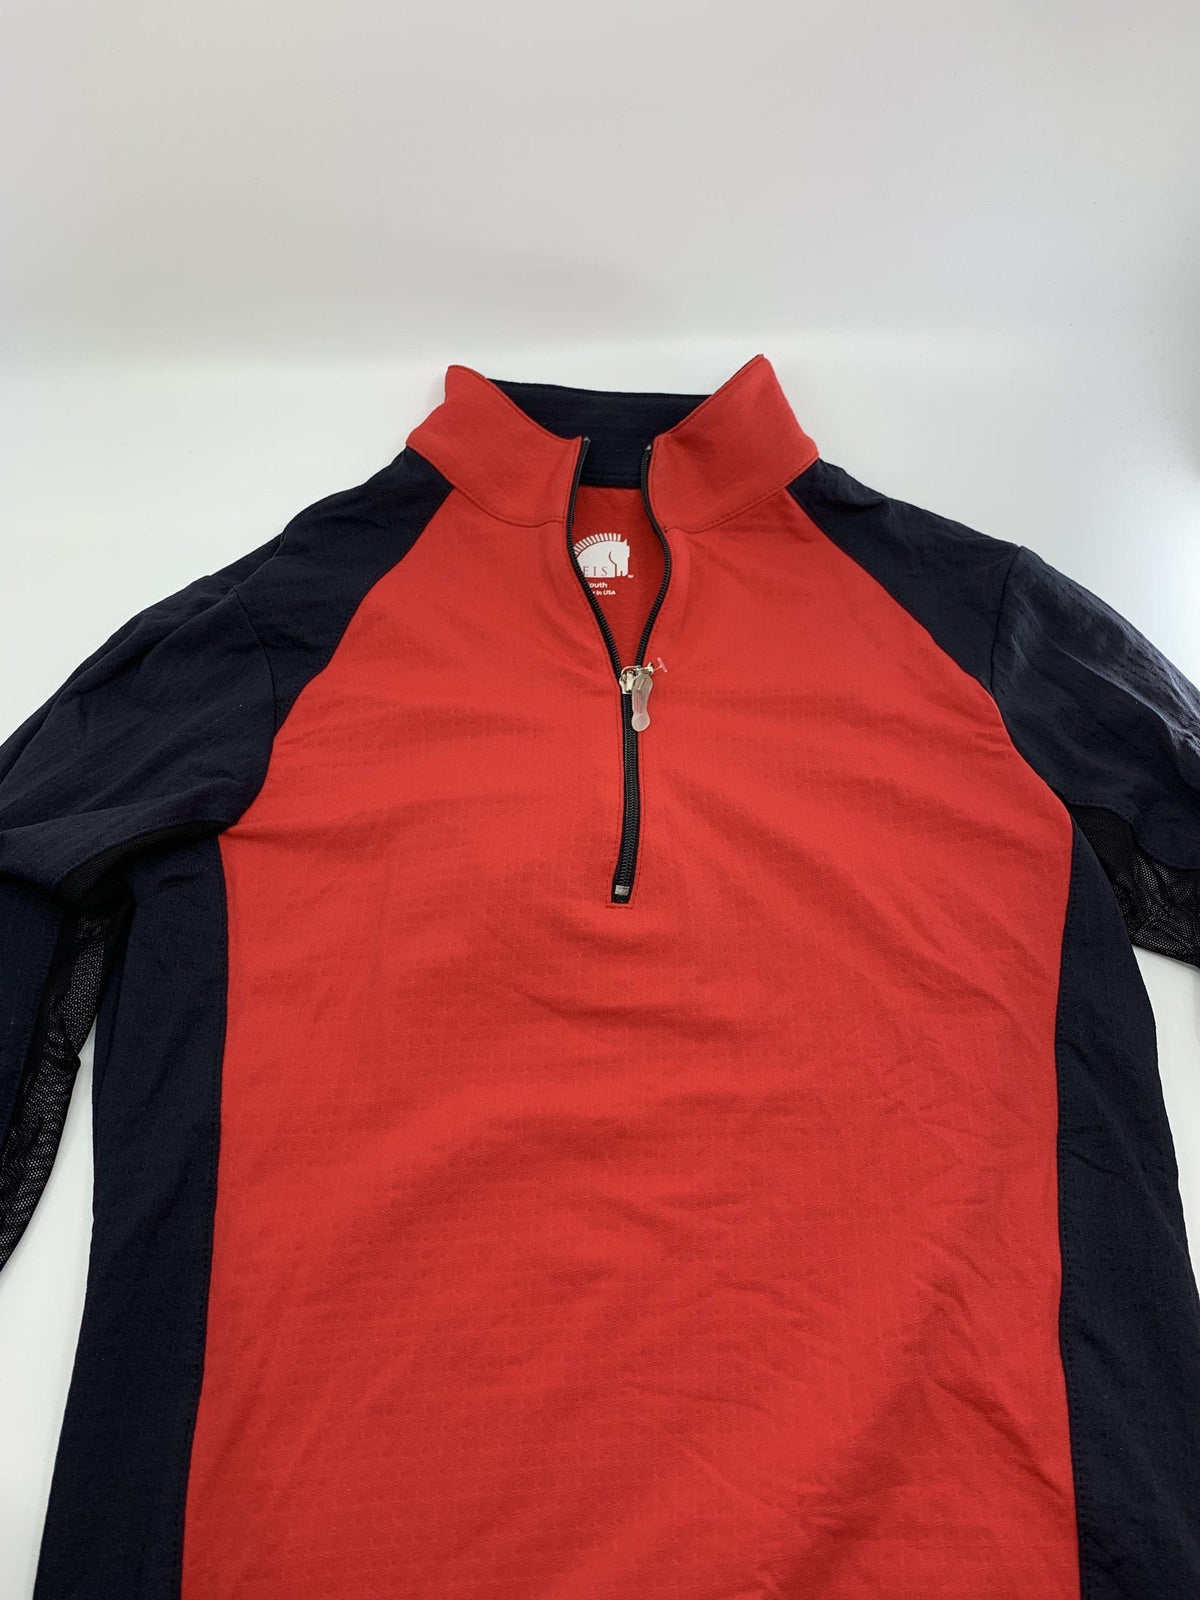 EIS Youth Shirt Red/Black EIS- Sun Shirts Youth Large 8-10 equestrian team apparel online tack store mobile tack store custom farm apparel custom show stable clothing equestrian lifestyle horse show clothing riding clothes ETA Kids Equestrian Fashion | EIS Sun Shirts horses equestrian tack store